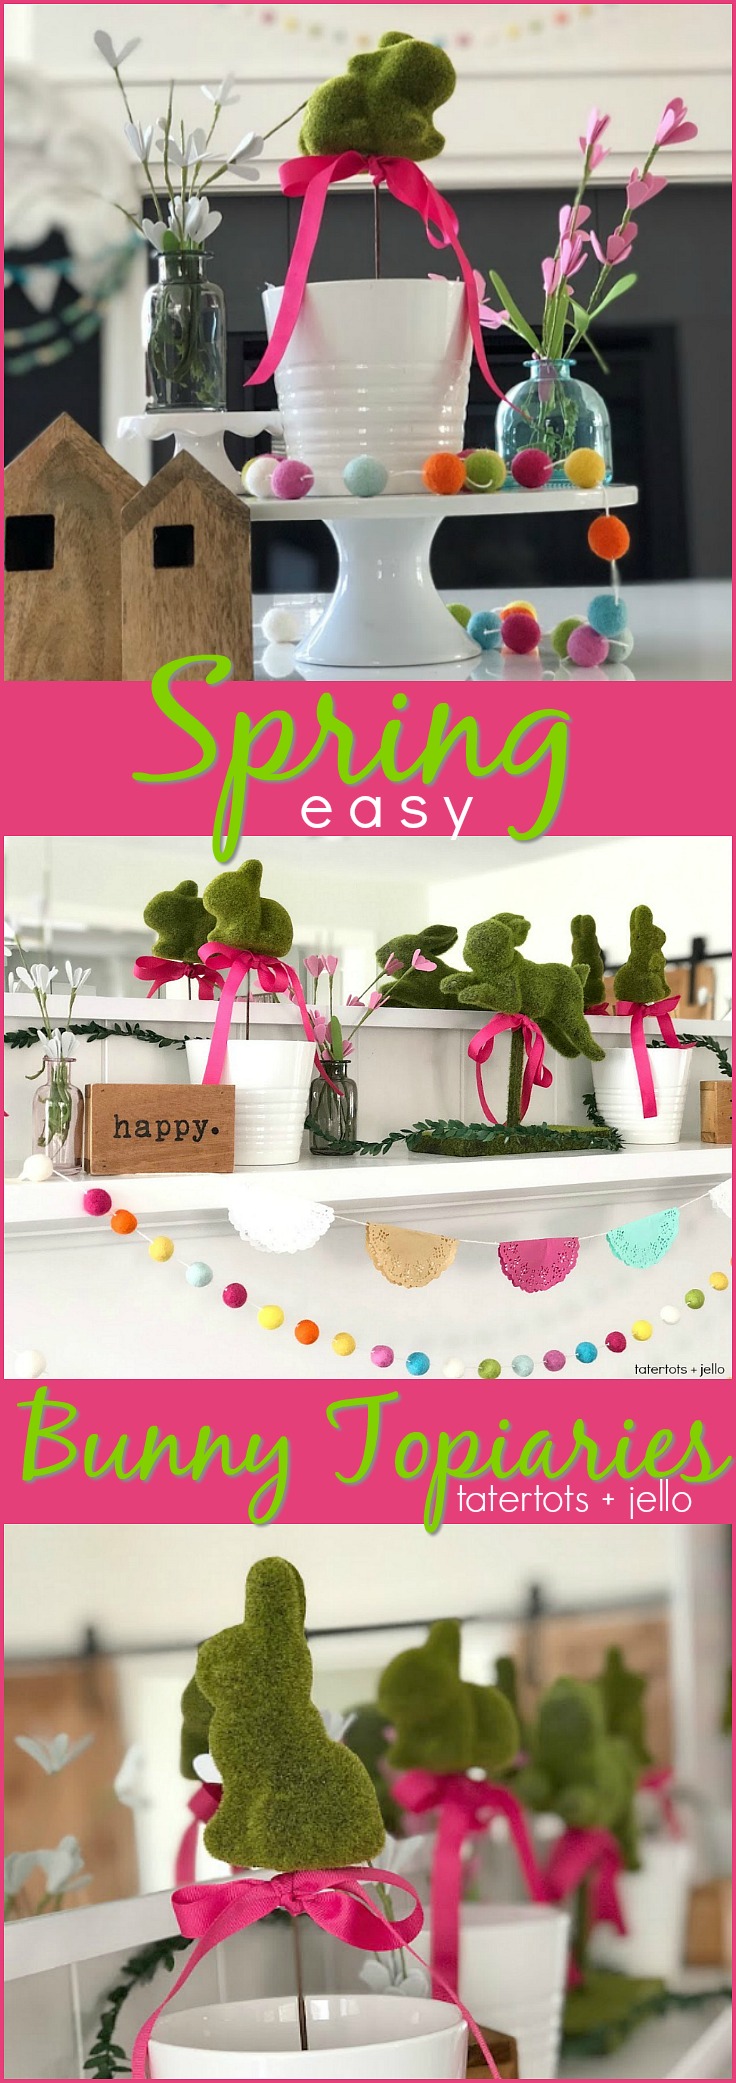 Spring Floral Bunny Topiaries - easy to make a beautiful focal point on a coffee table, mantel or shelf! 